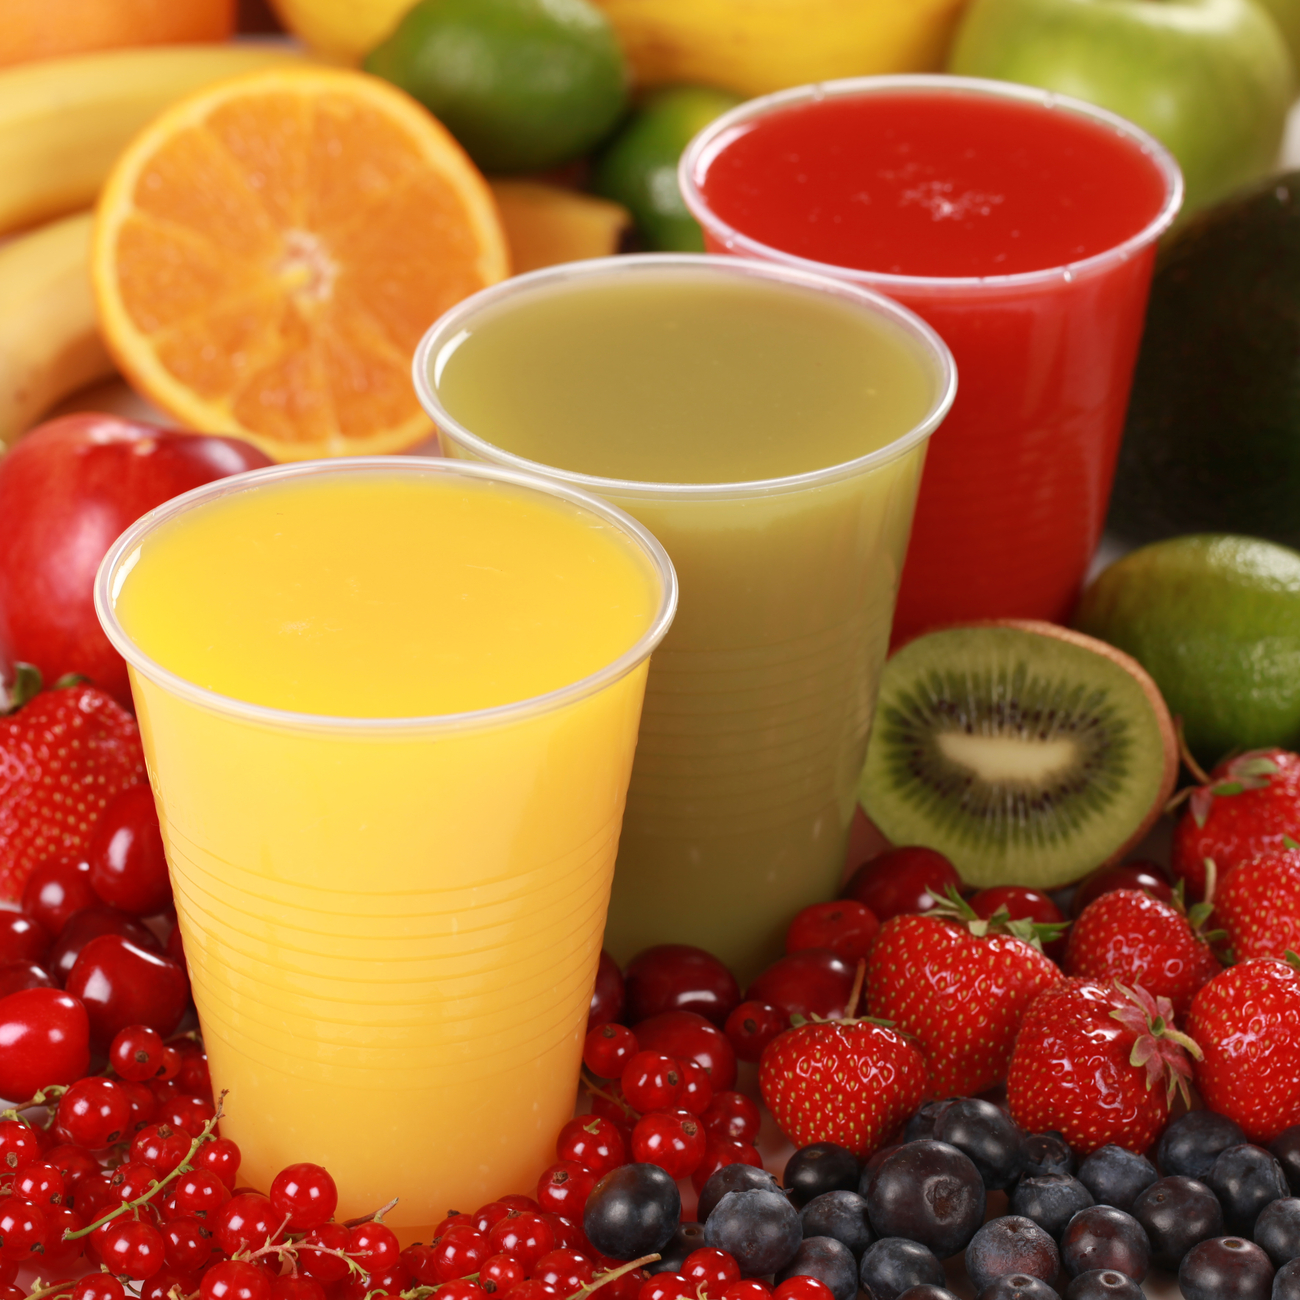 Differences Between Natural Whole Fruit and Natural Fruit Juice